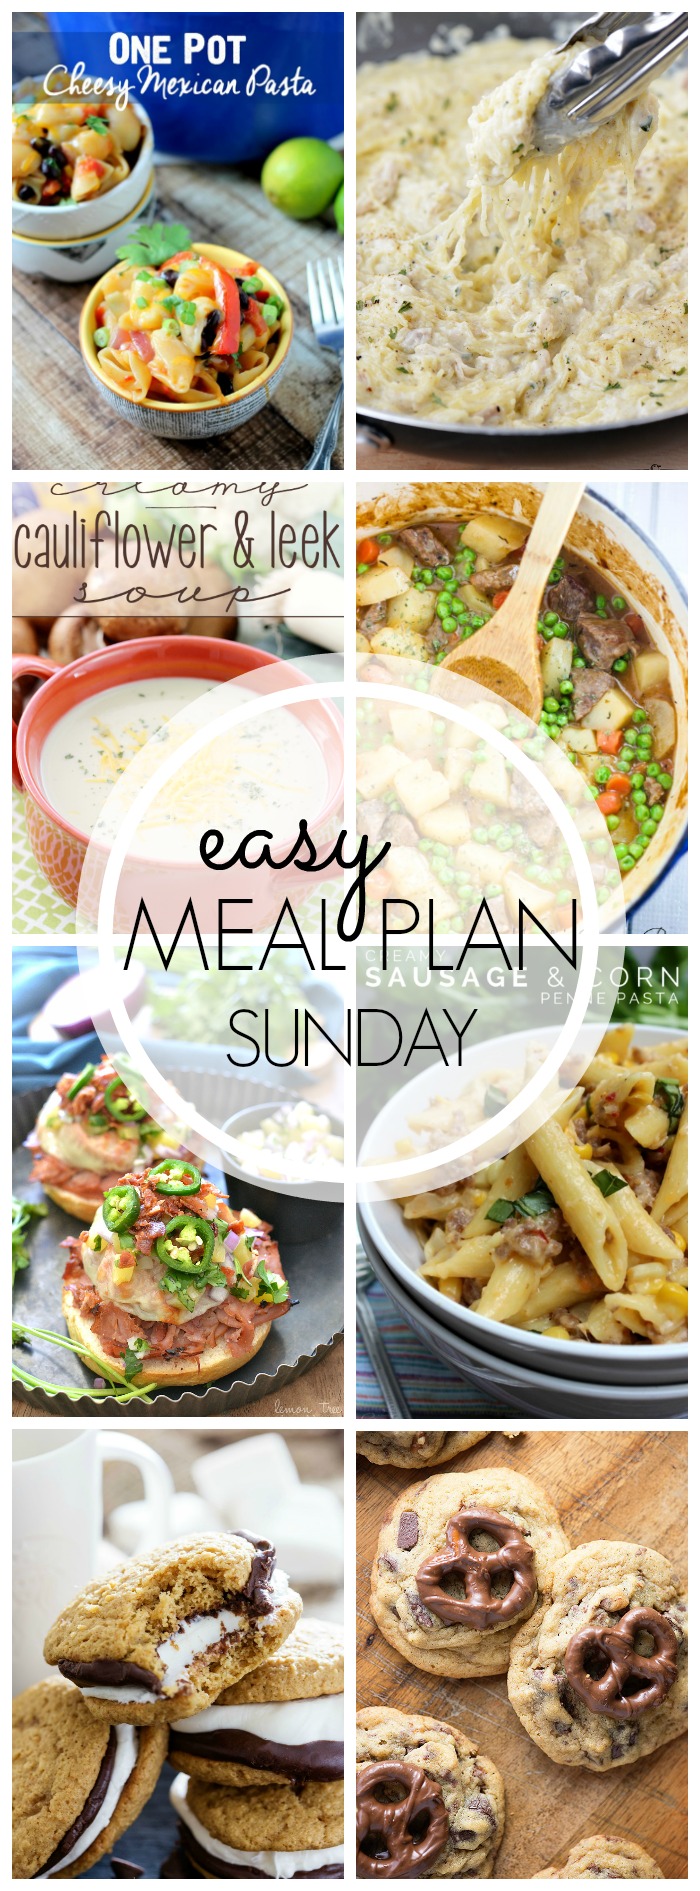 Easy Meal Plan Sunday #40